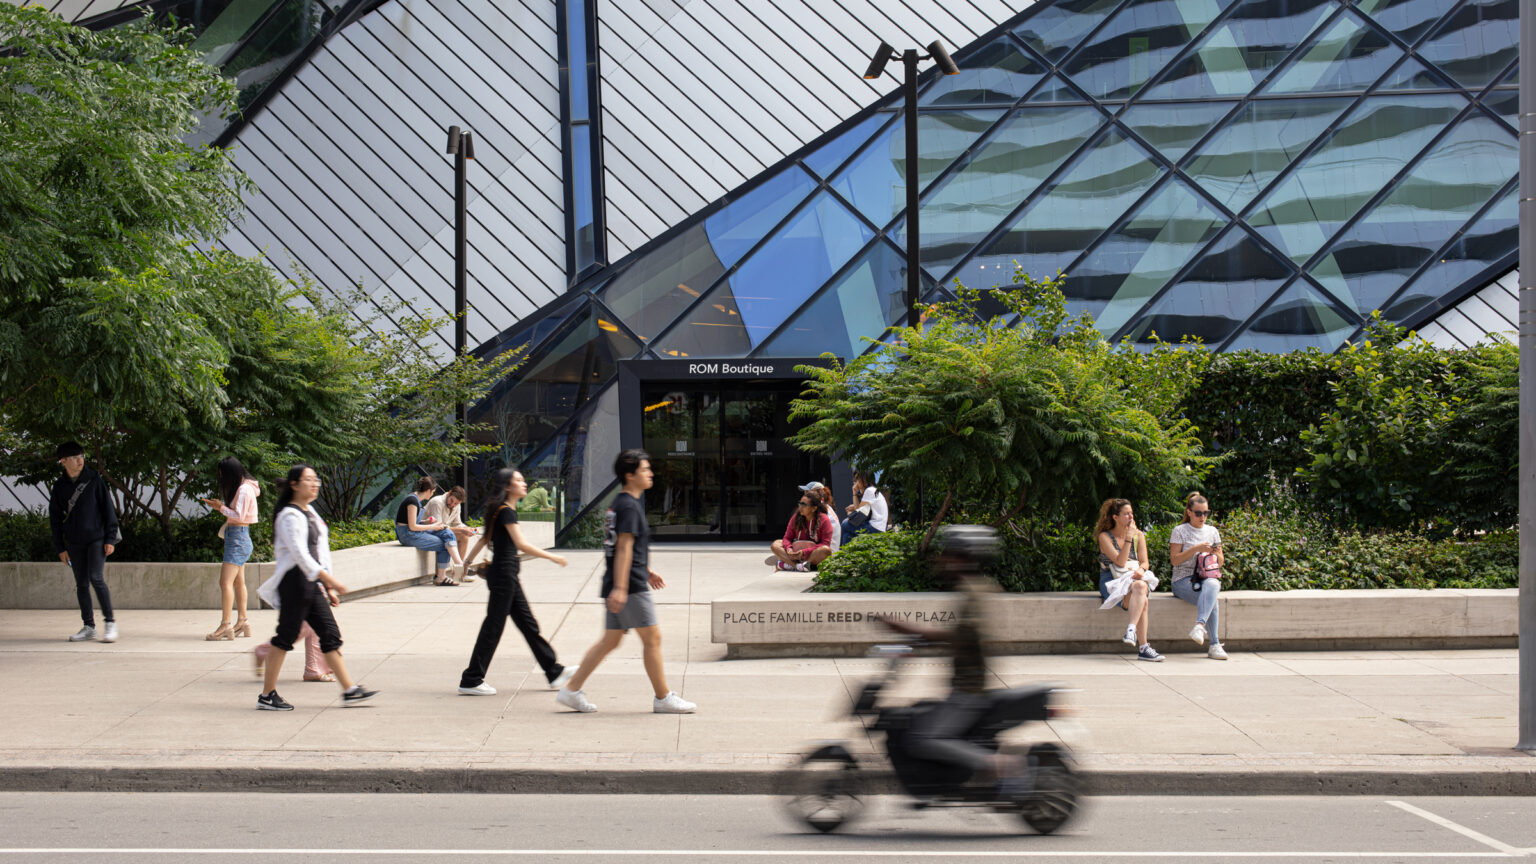 Street view of many people walking and sitting in front of the Royal Ontario Museum on Bloor Street West in Toronto, located directly across the street from Resident's Yorkville development